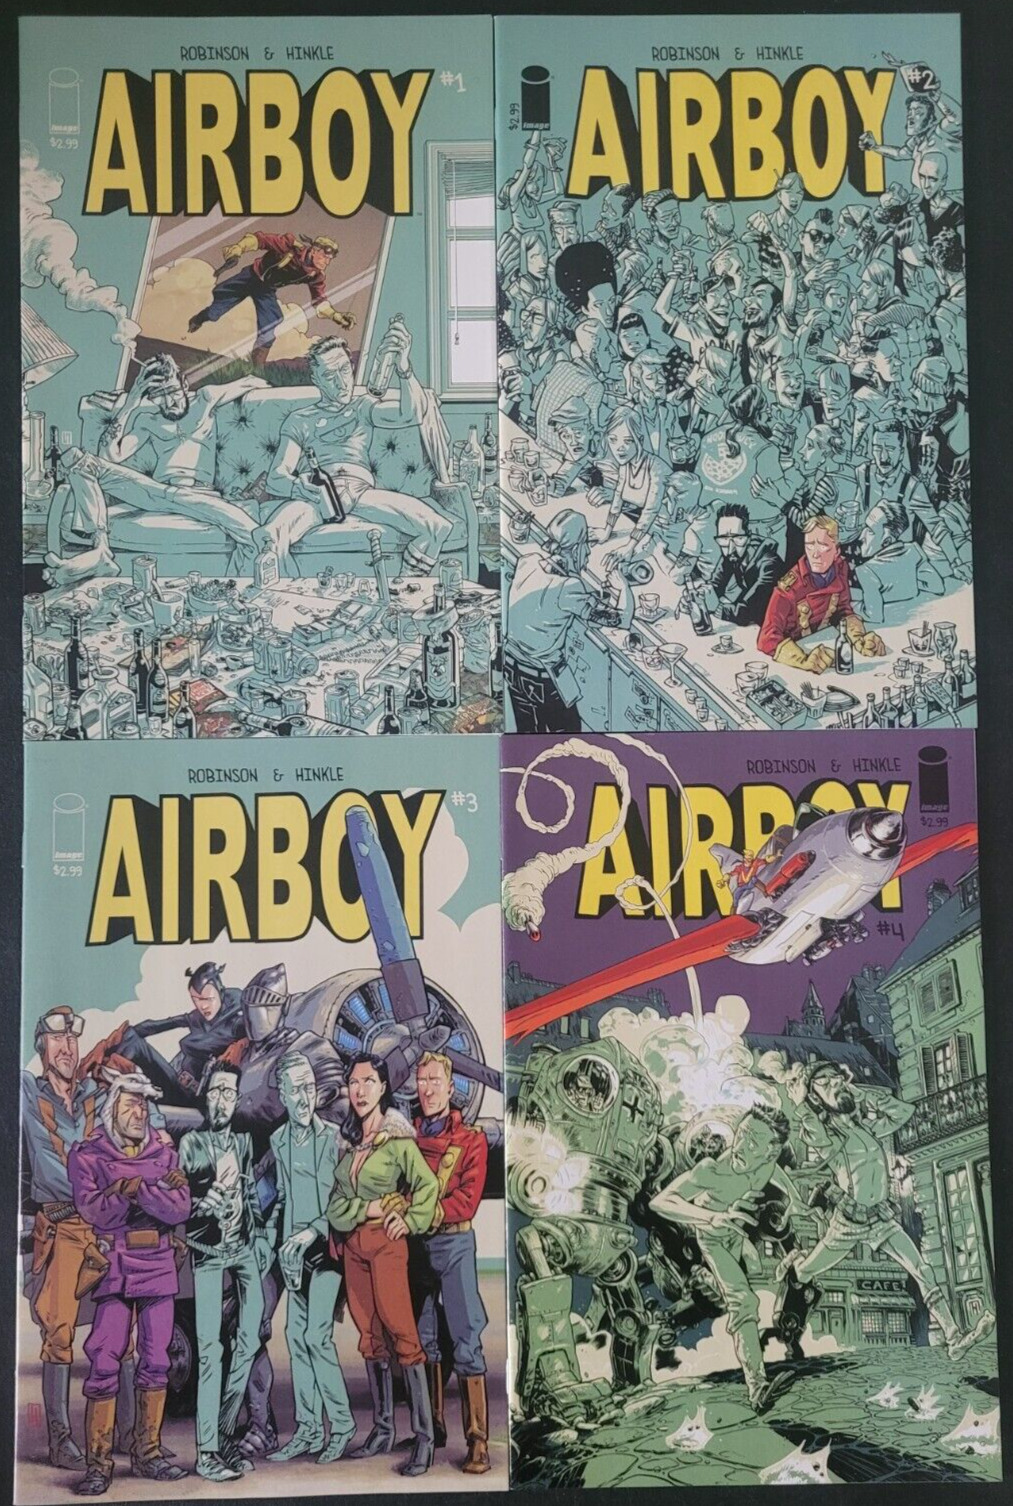 AIRBOY #1-4 (2015) IMAGE COMICS FULL COMPLETE SERIES VALKYRIE ROBINSON HINKLE